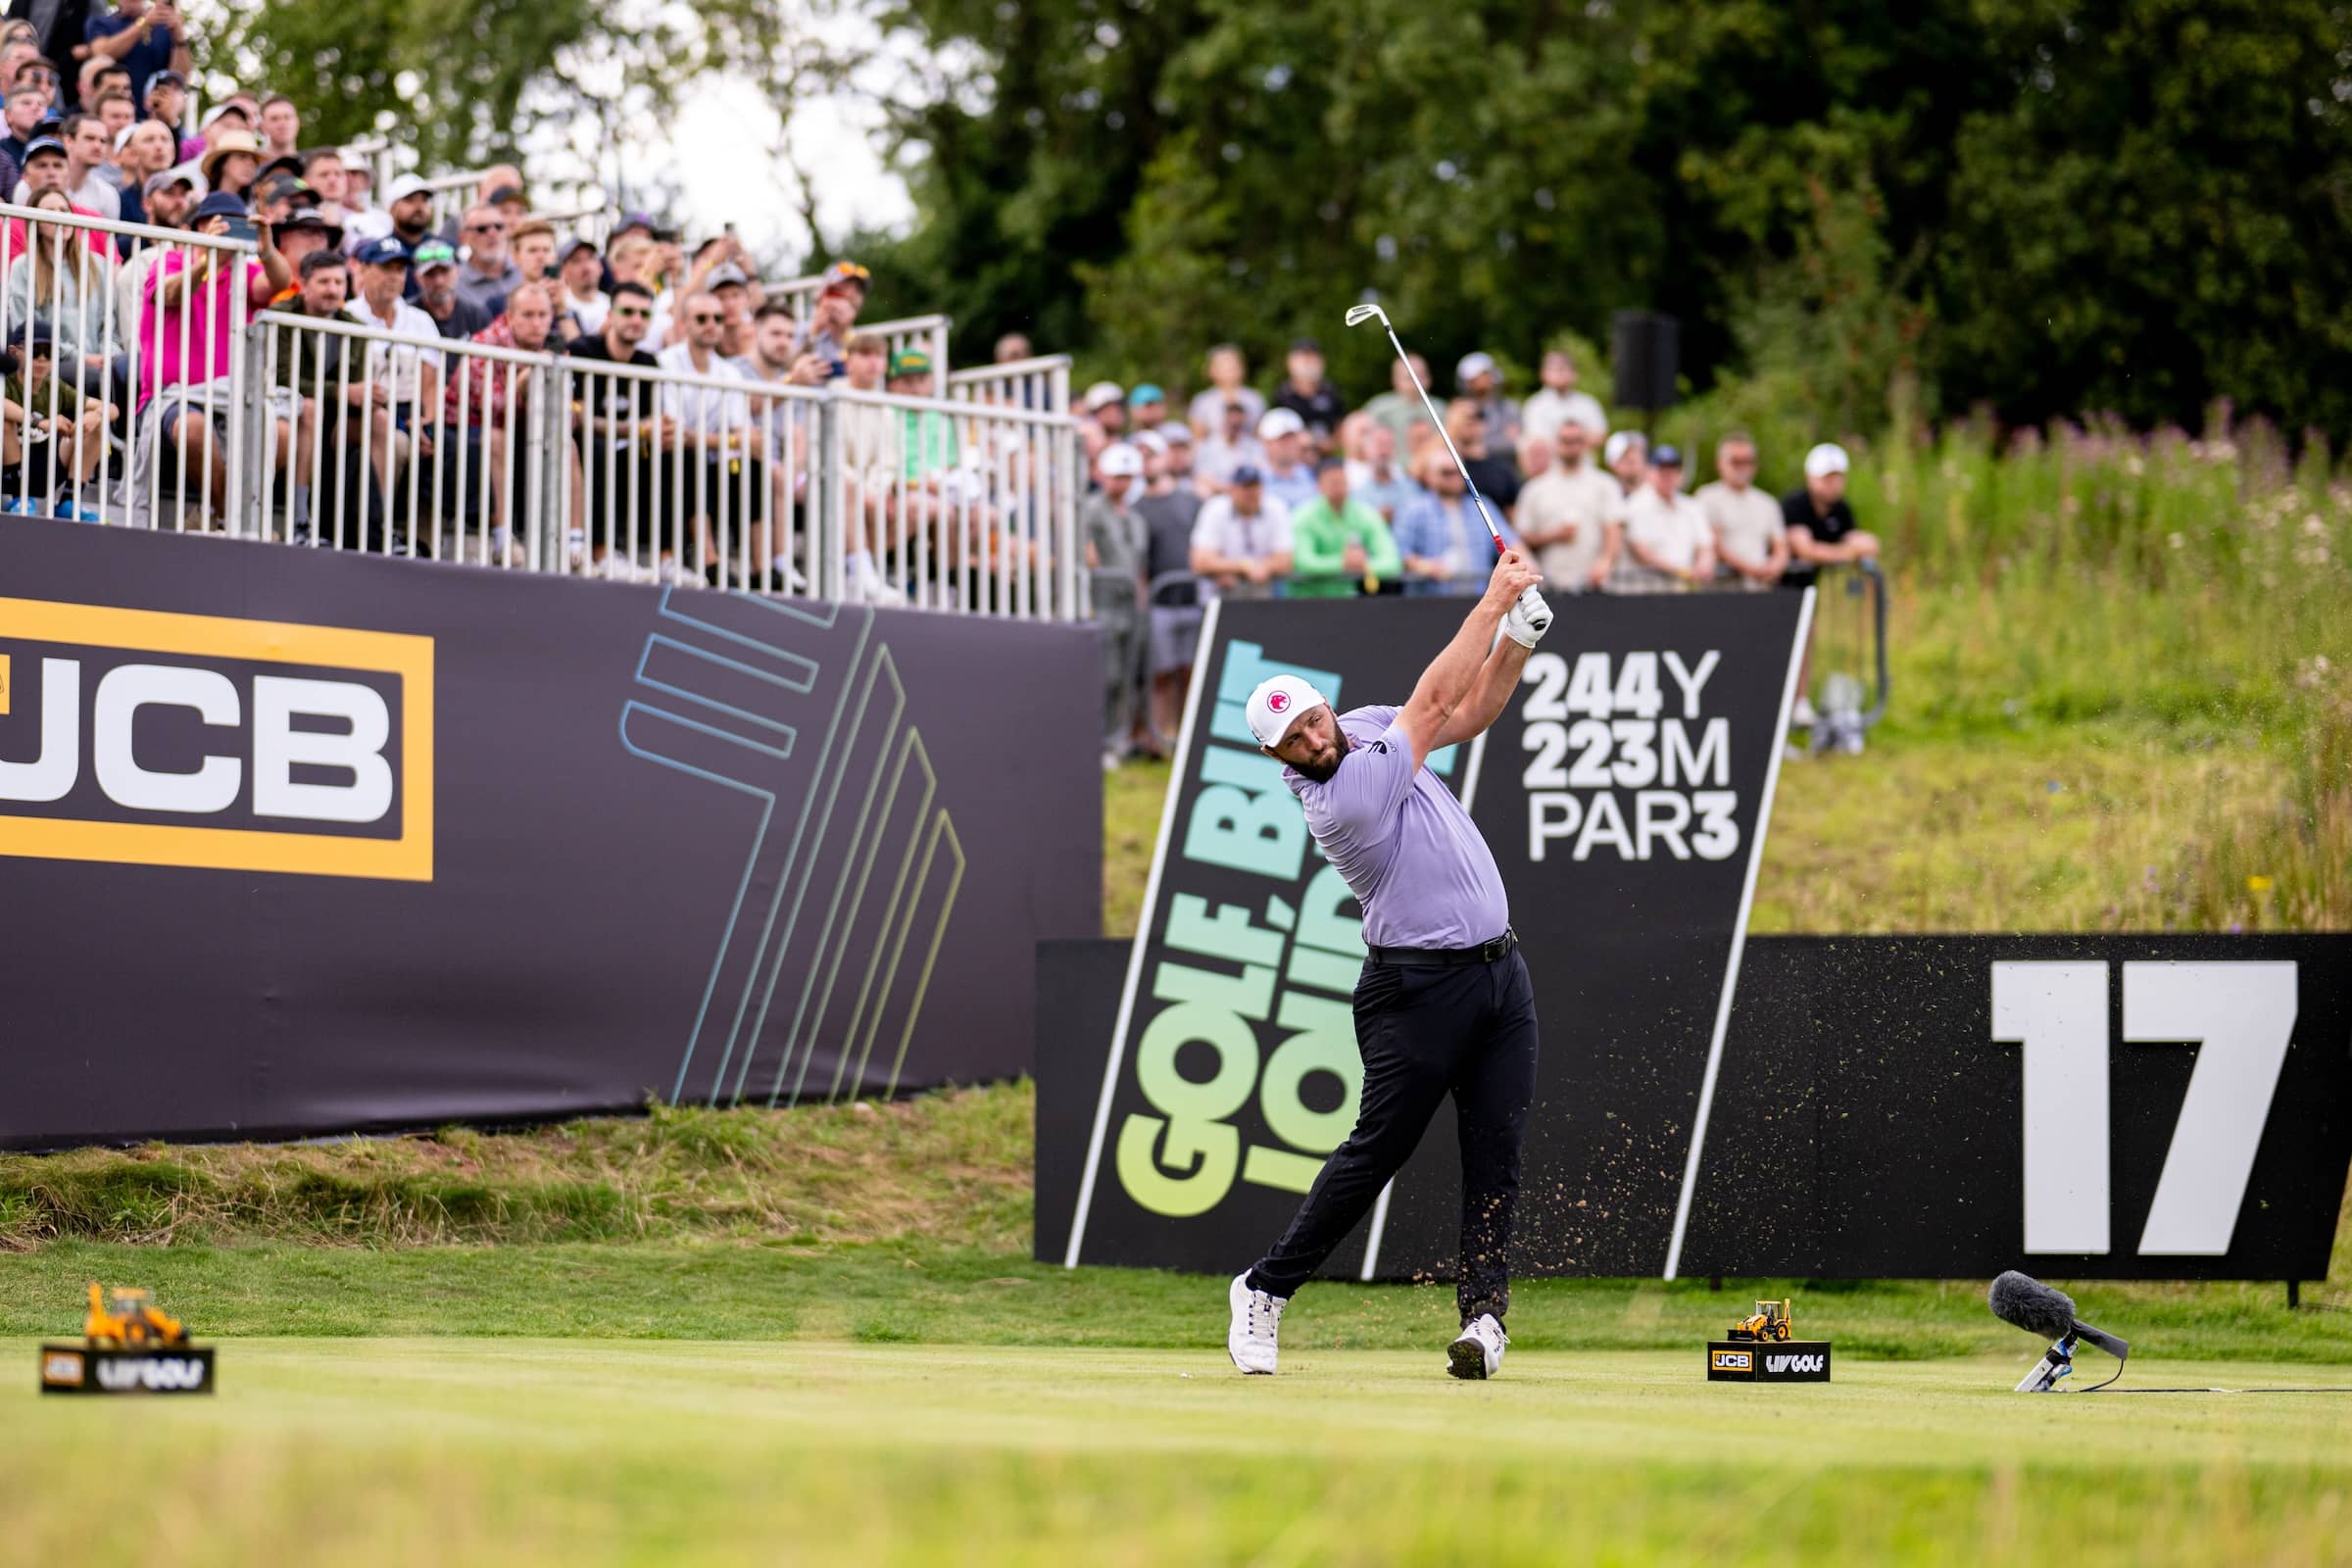 Captain Jon Rahm of Legion XIII hits his shot from the 17th tee during the first round of LIV Golf United Kingdom by JCB